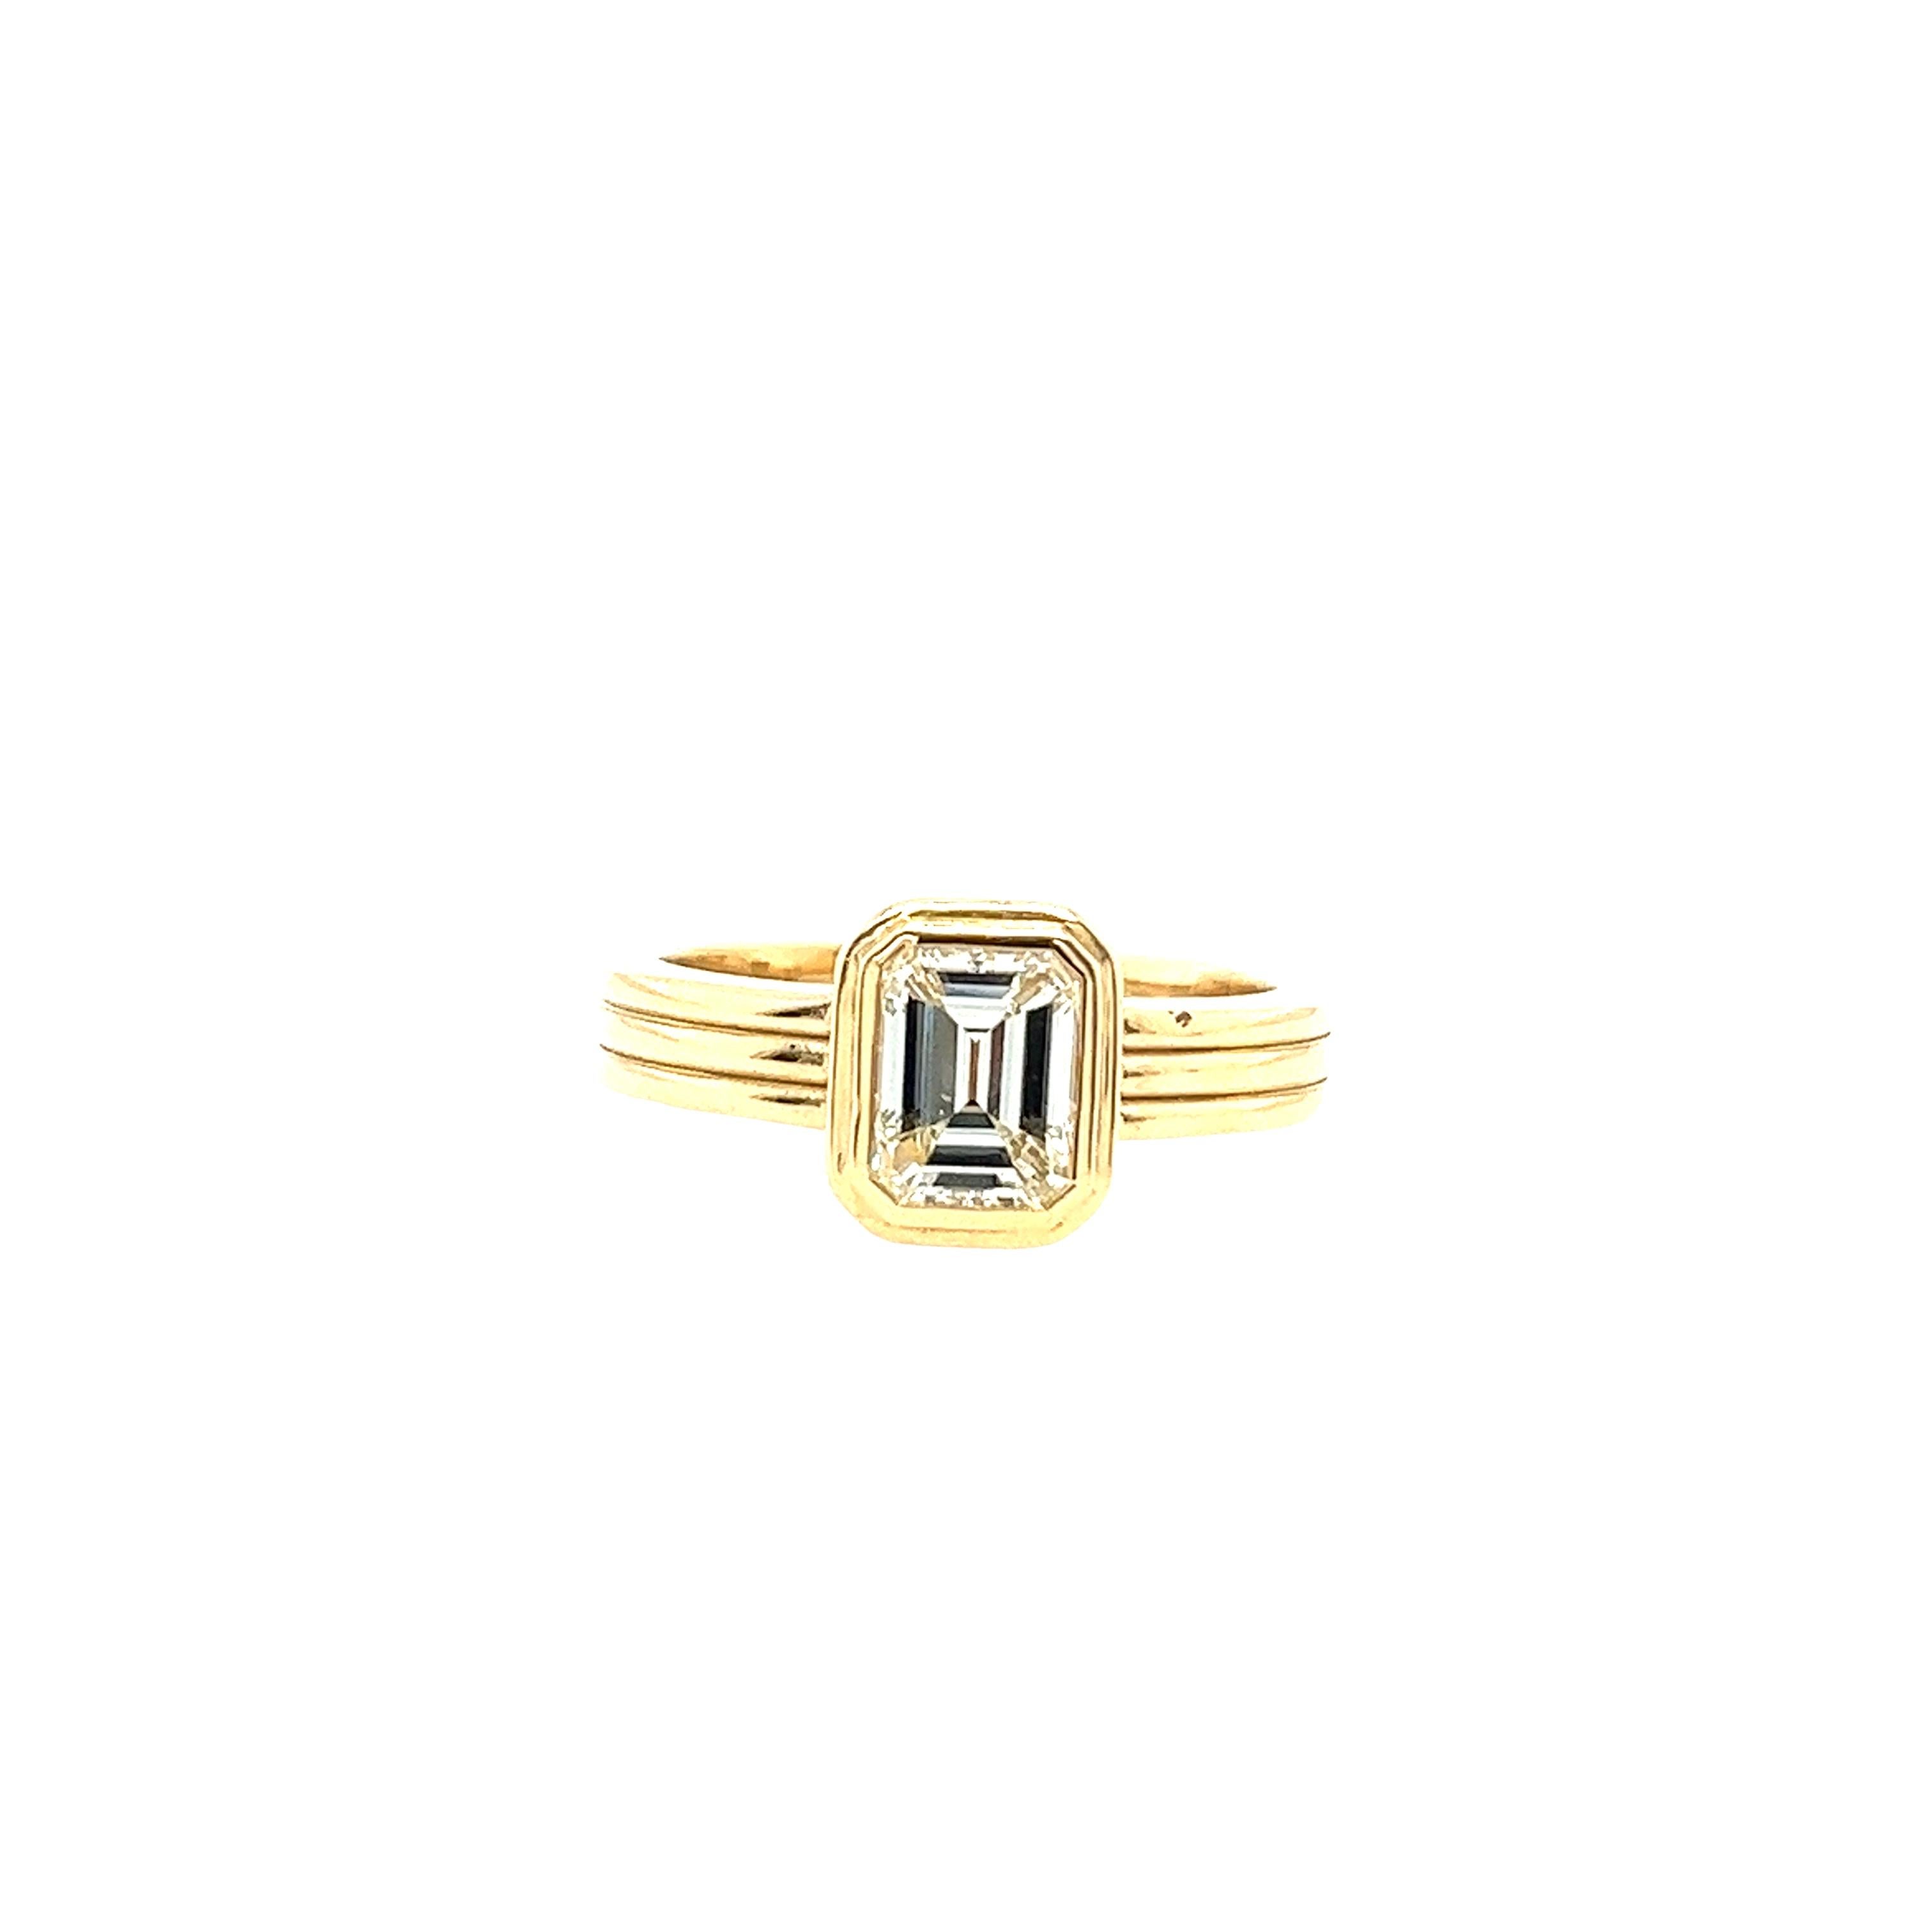 Diamond Solitaire Ring Set With 1.01ct K/VS2 Emerald Cut Diamond, In 18ct Gold For Sale 2